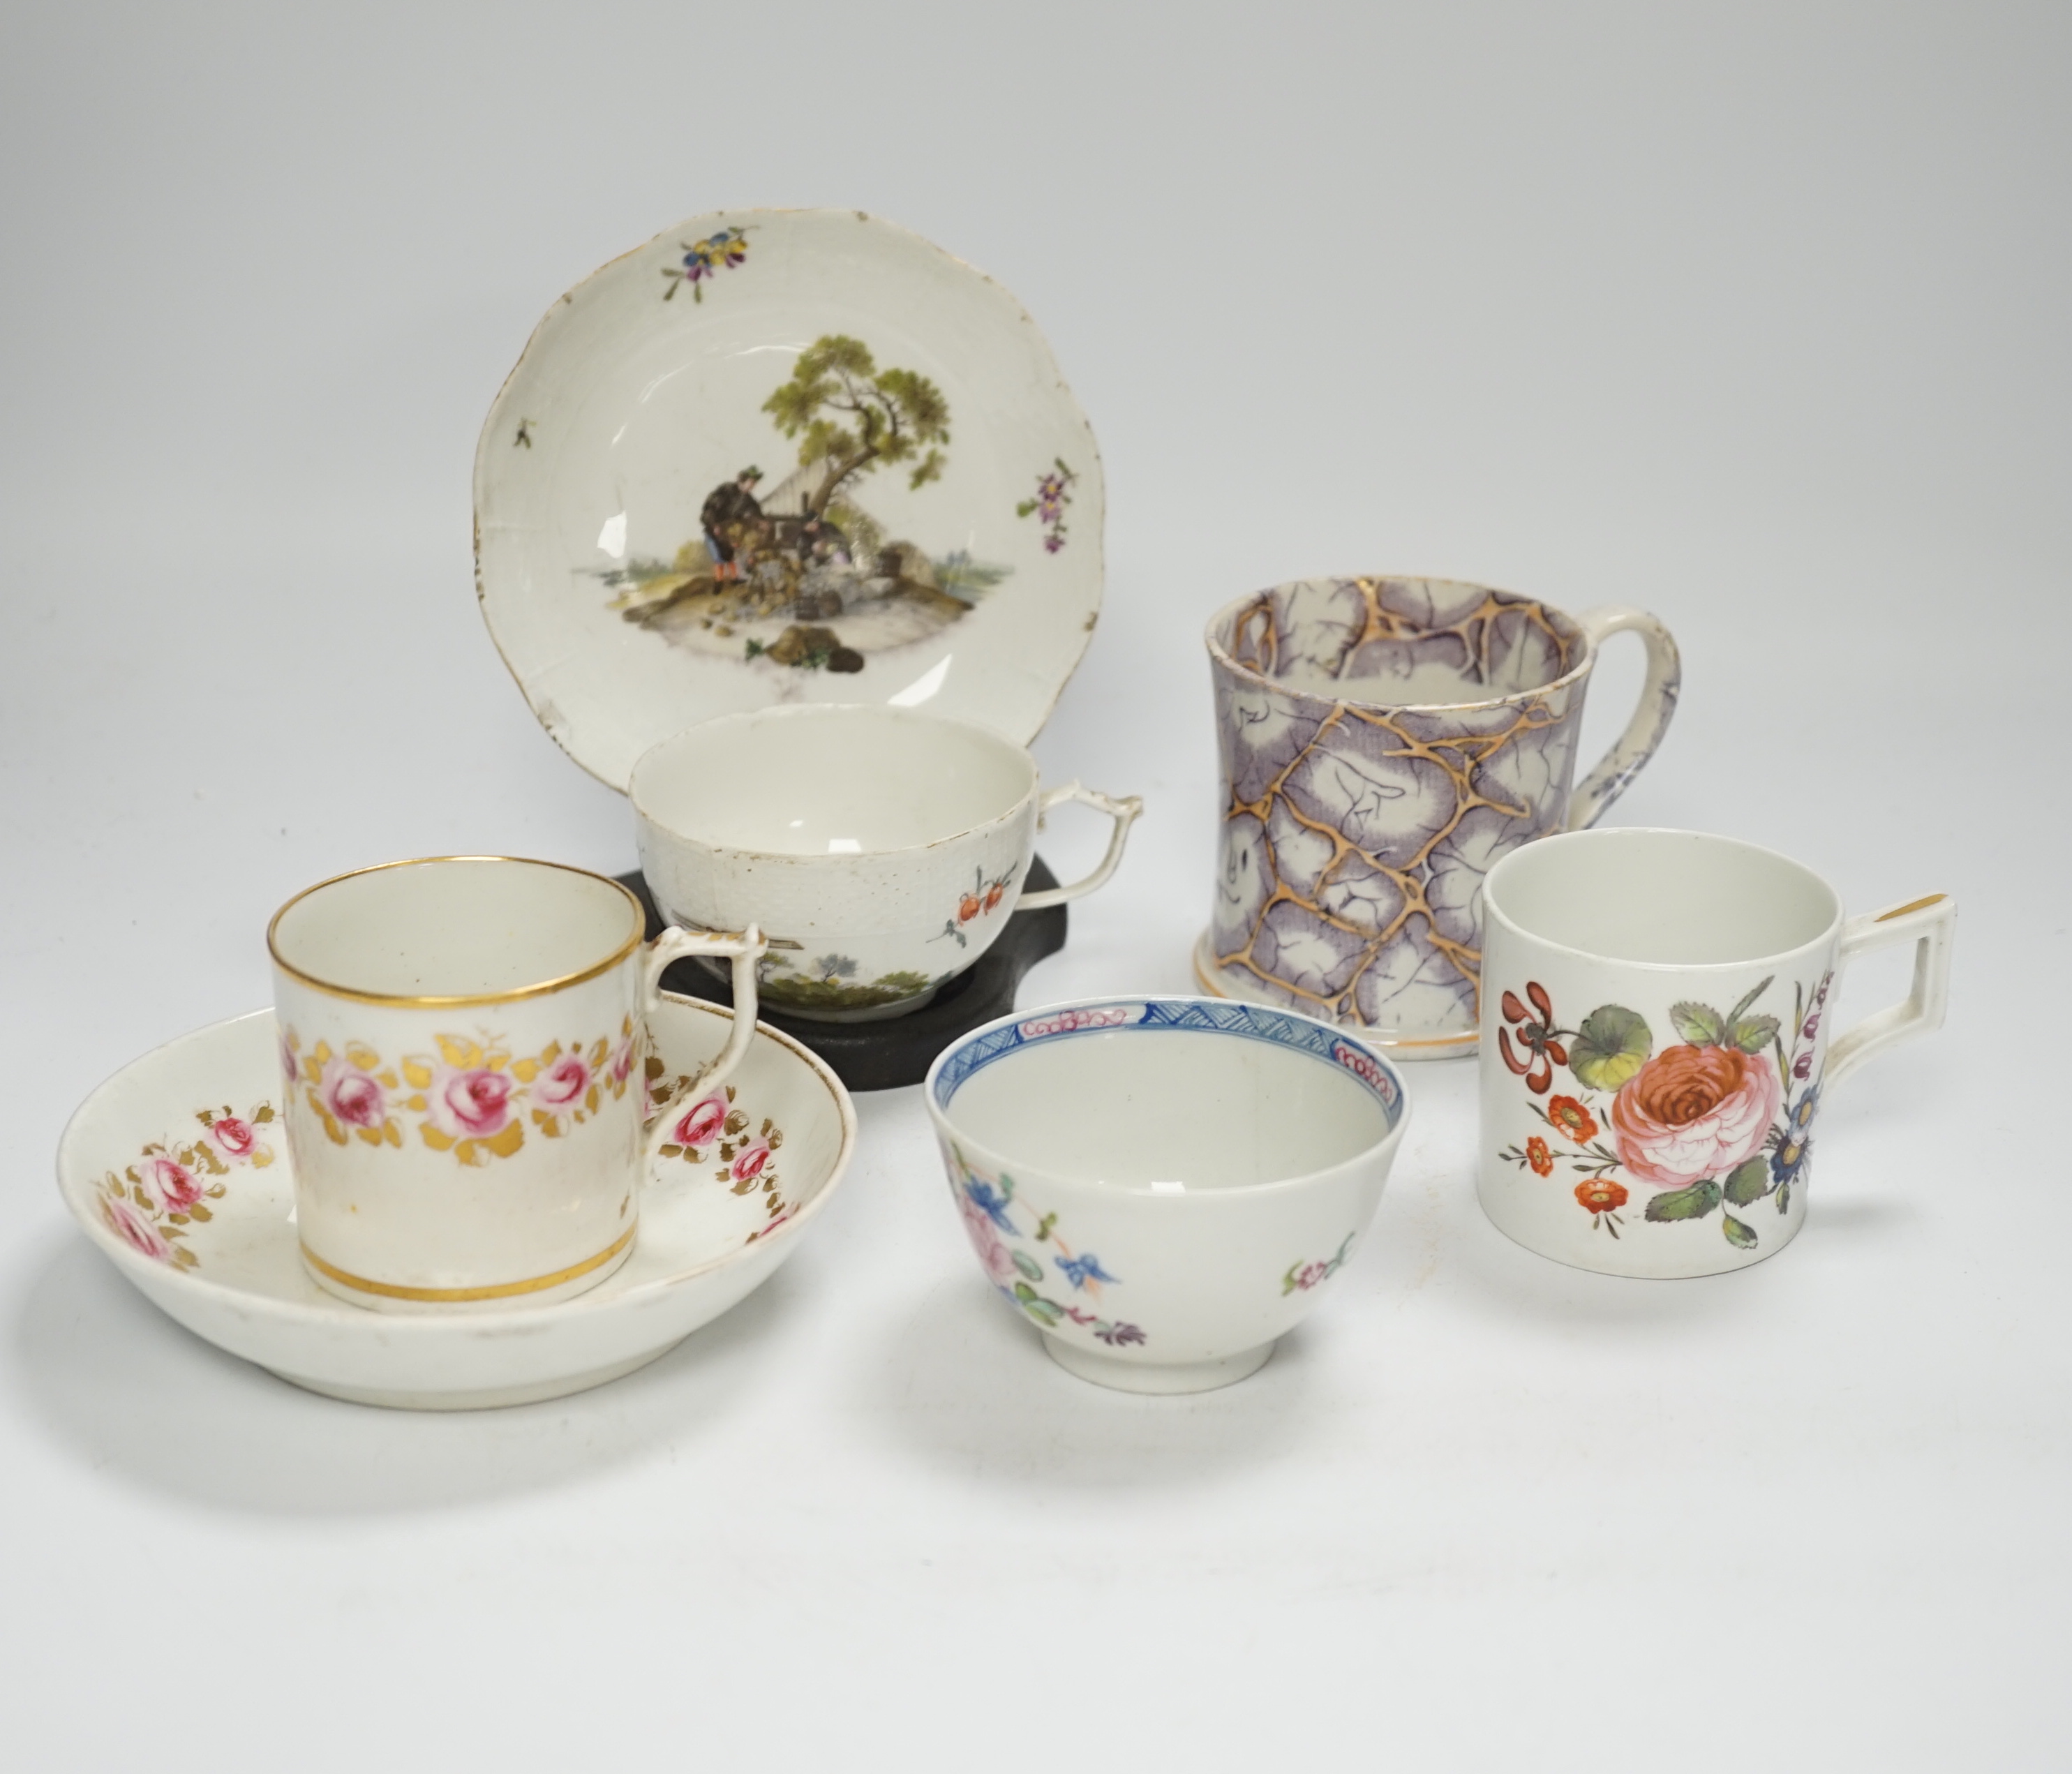 Two Derby porcelain coffee cans and one saucer, a tea bowl, a pearlware mug and a mid 18th century